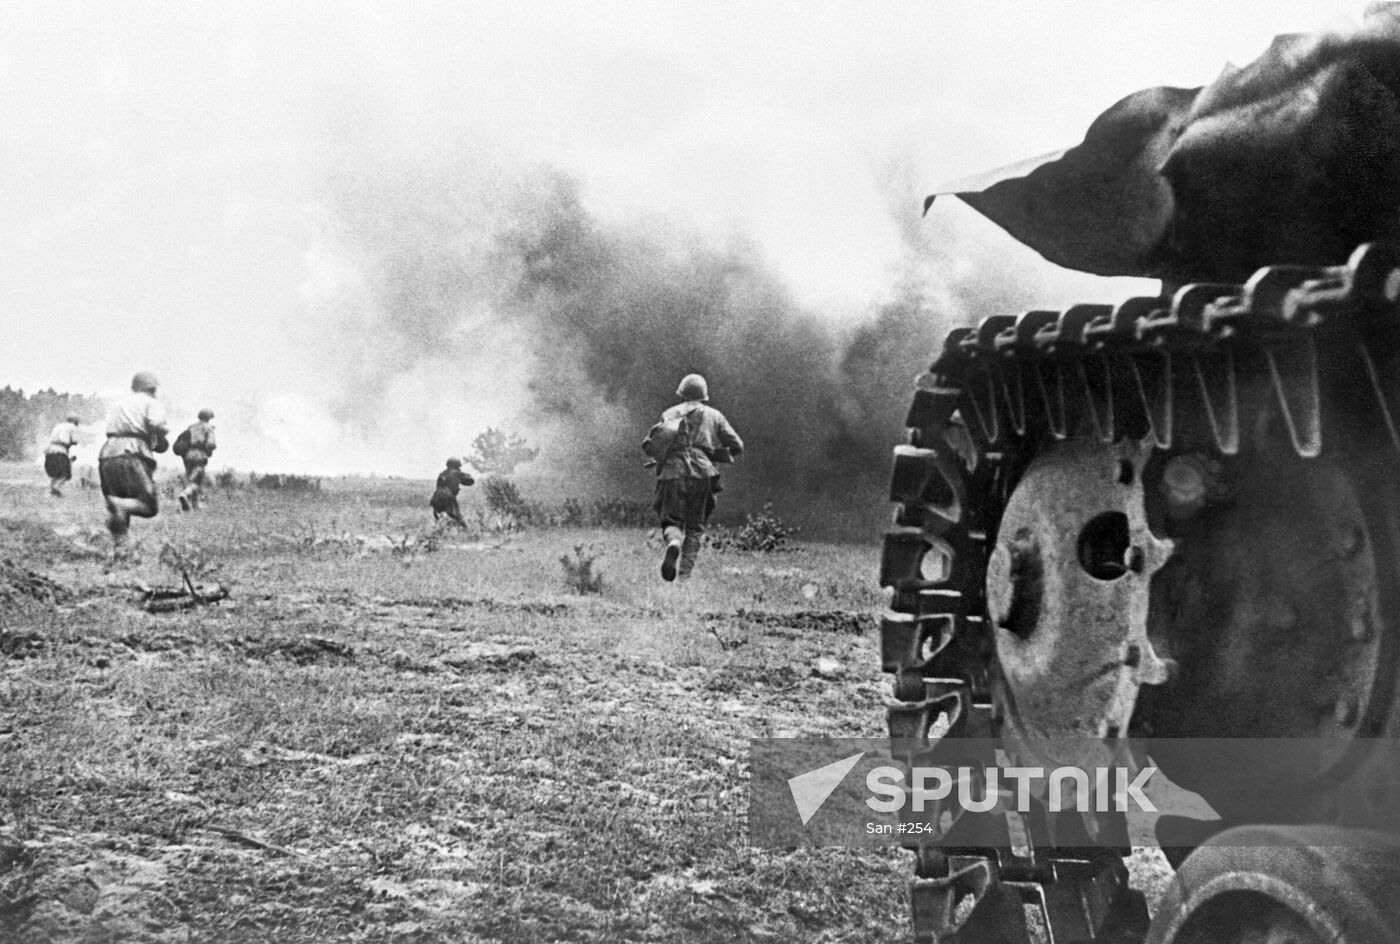 WWII TANK SOLDIERS ATTACK